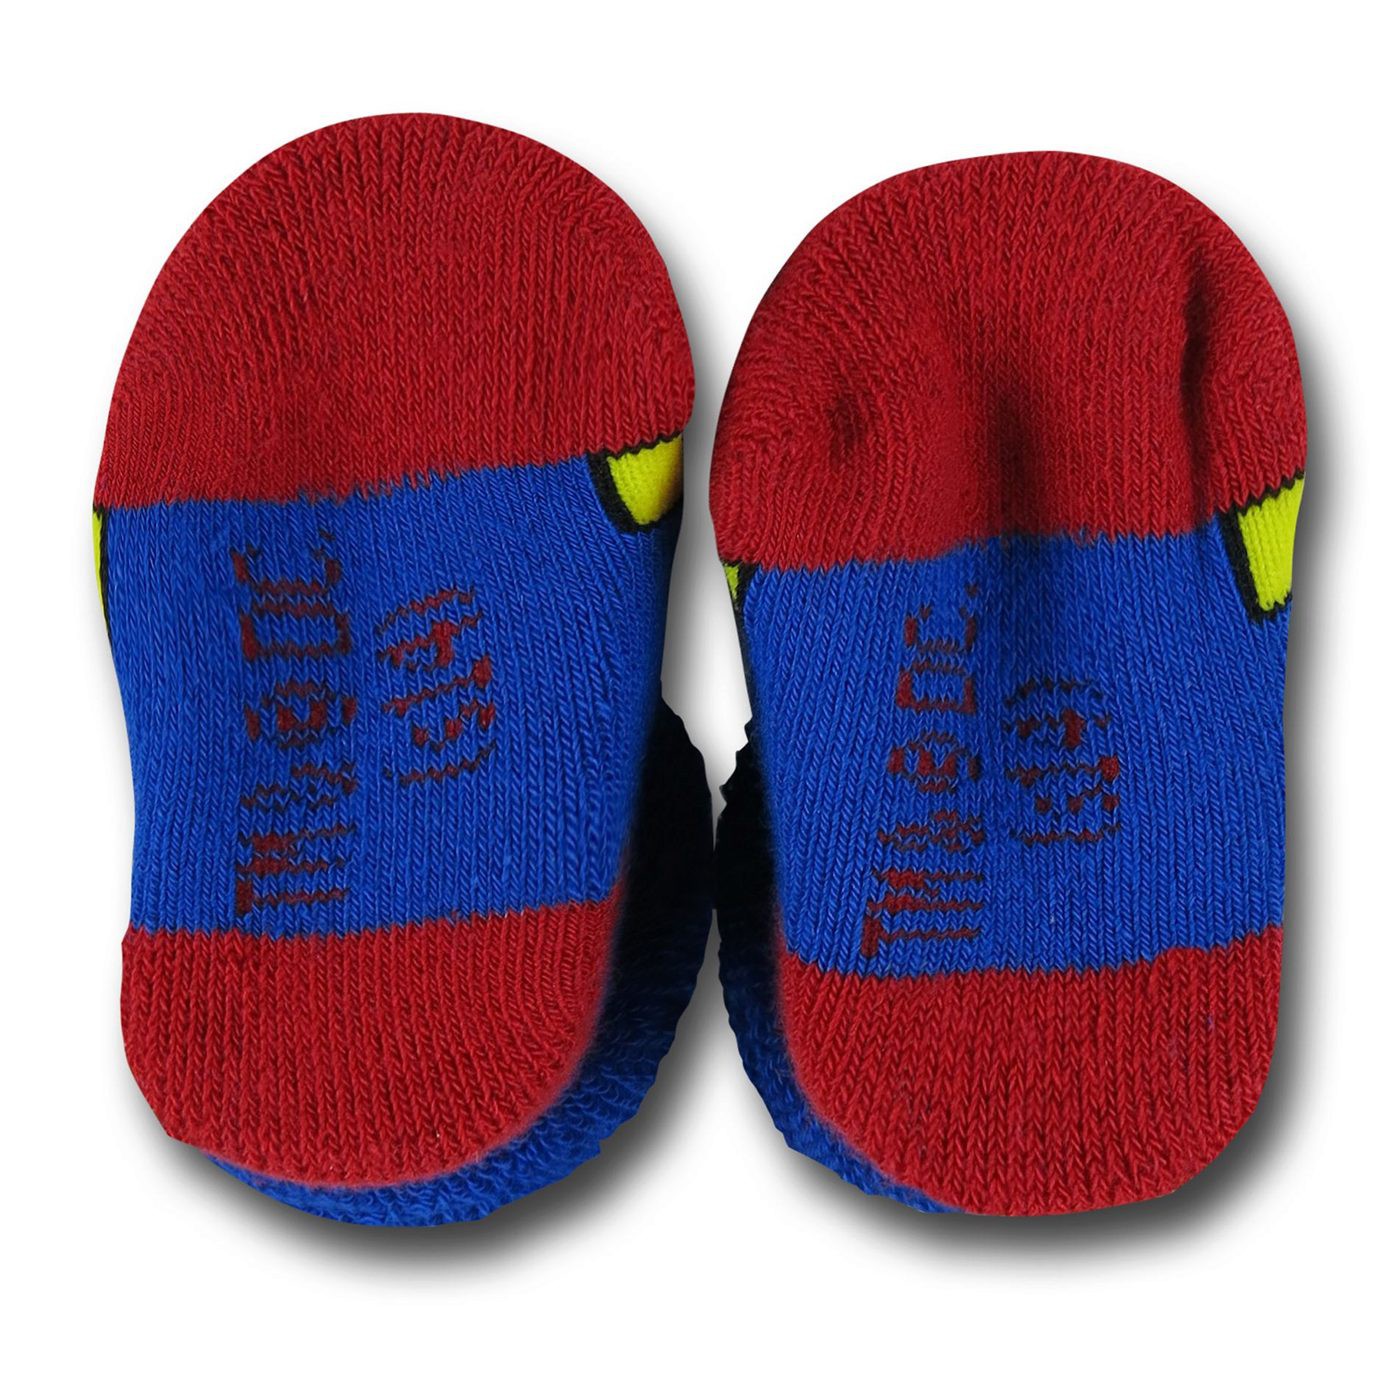 Superman 2 Pack Infant Booties